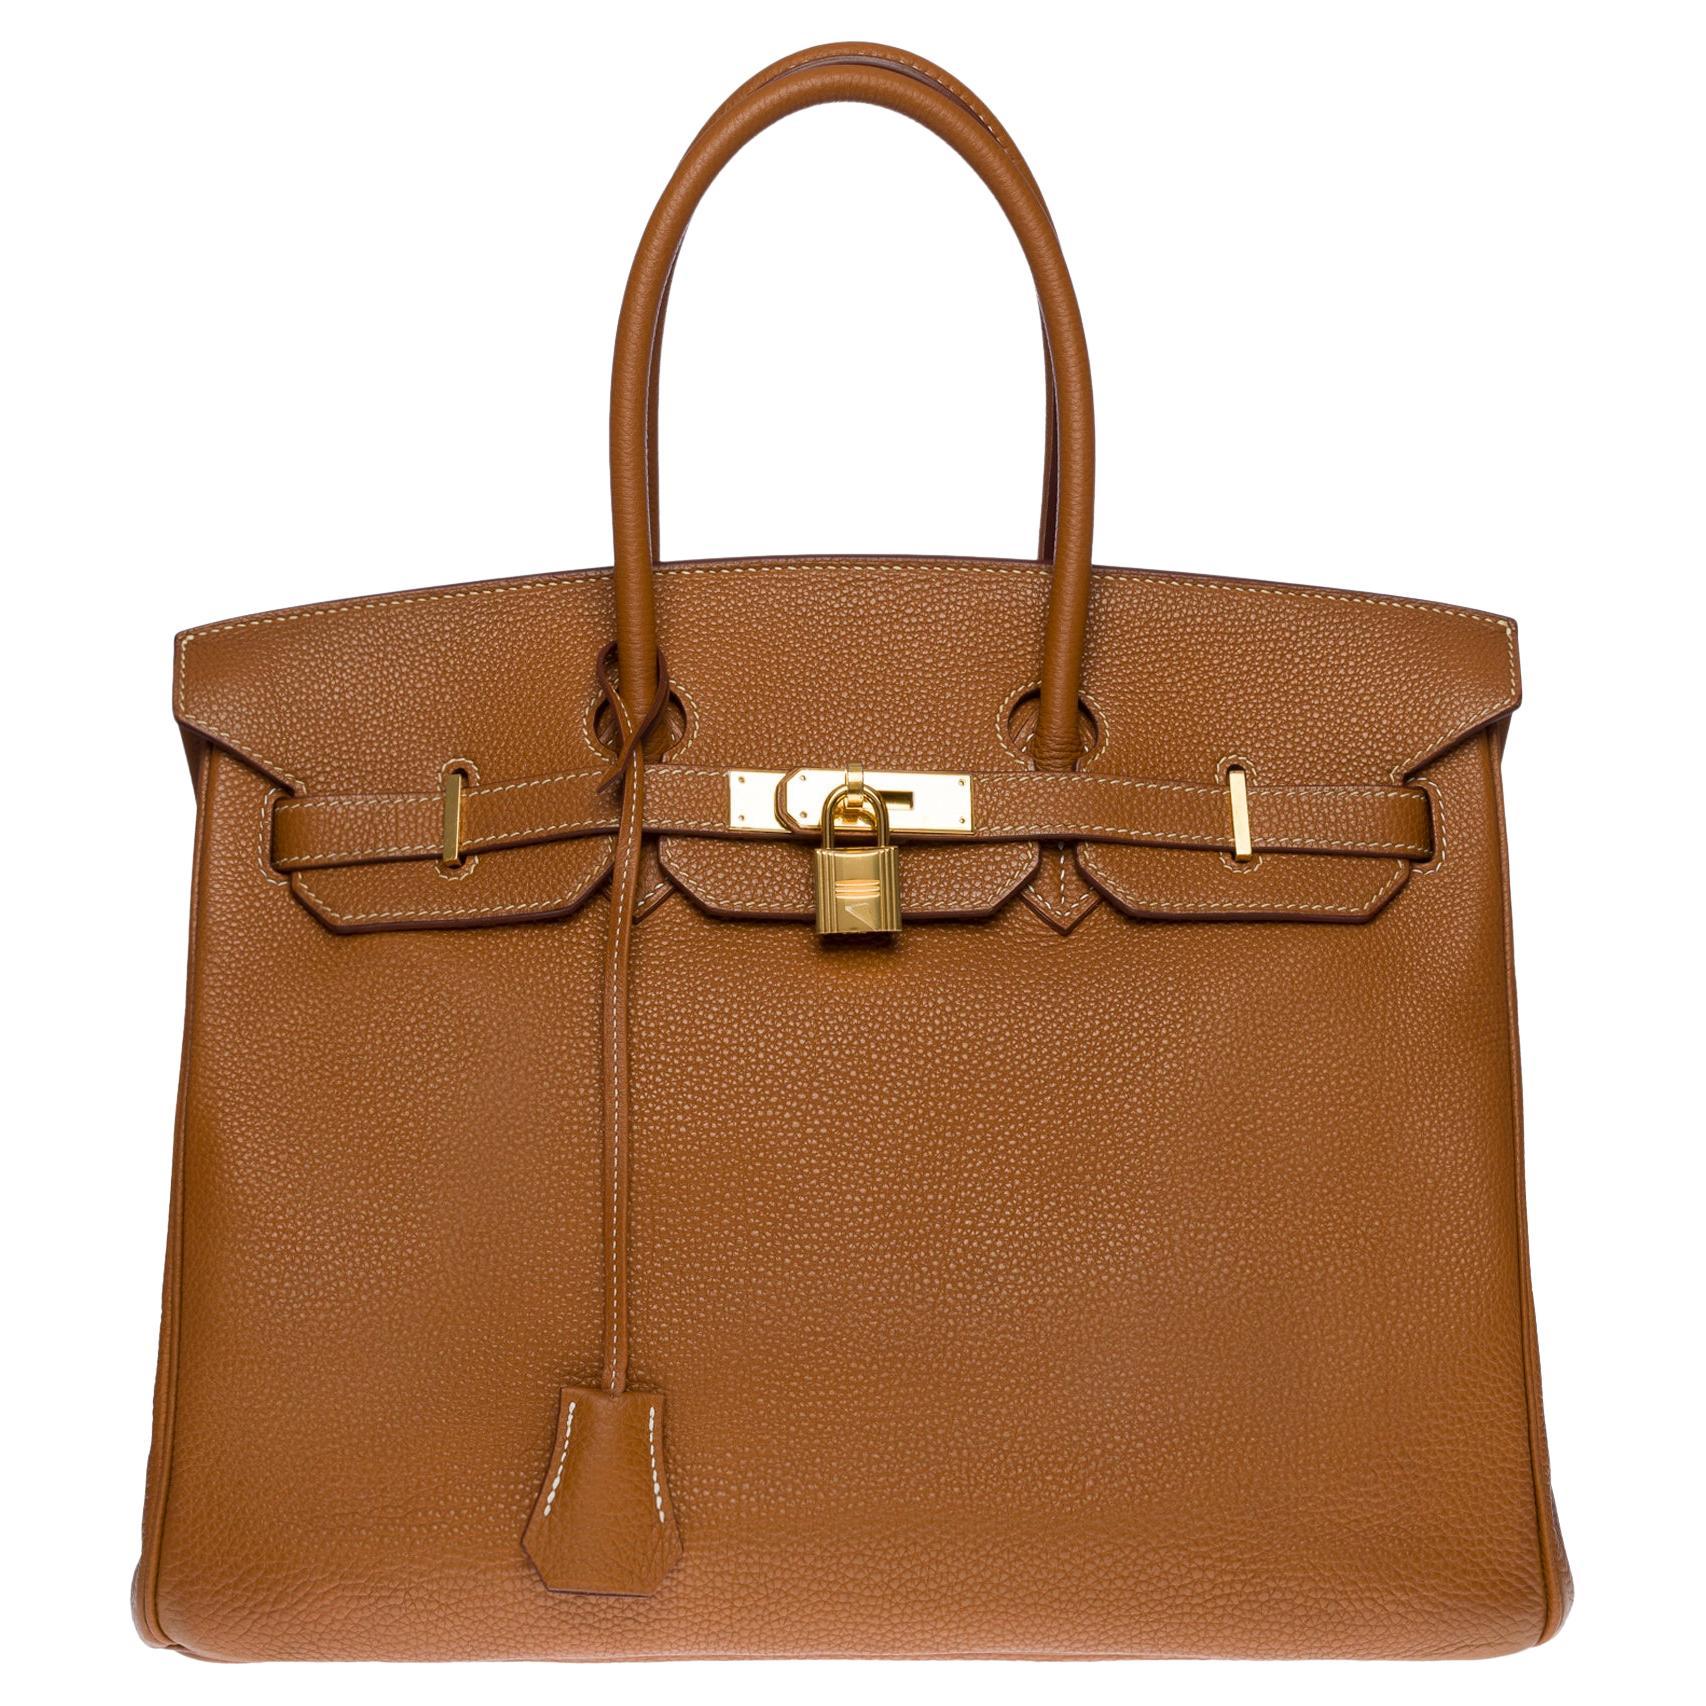 Beautiful Hermes Birkin 35 handbag in Camel (Gold) Togo leather with white stitching, gold metal hardware, double handle in gold leather allowing a hand-held

Flap closure
Inner lining in gold leather, one zippered pocket, one patch